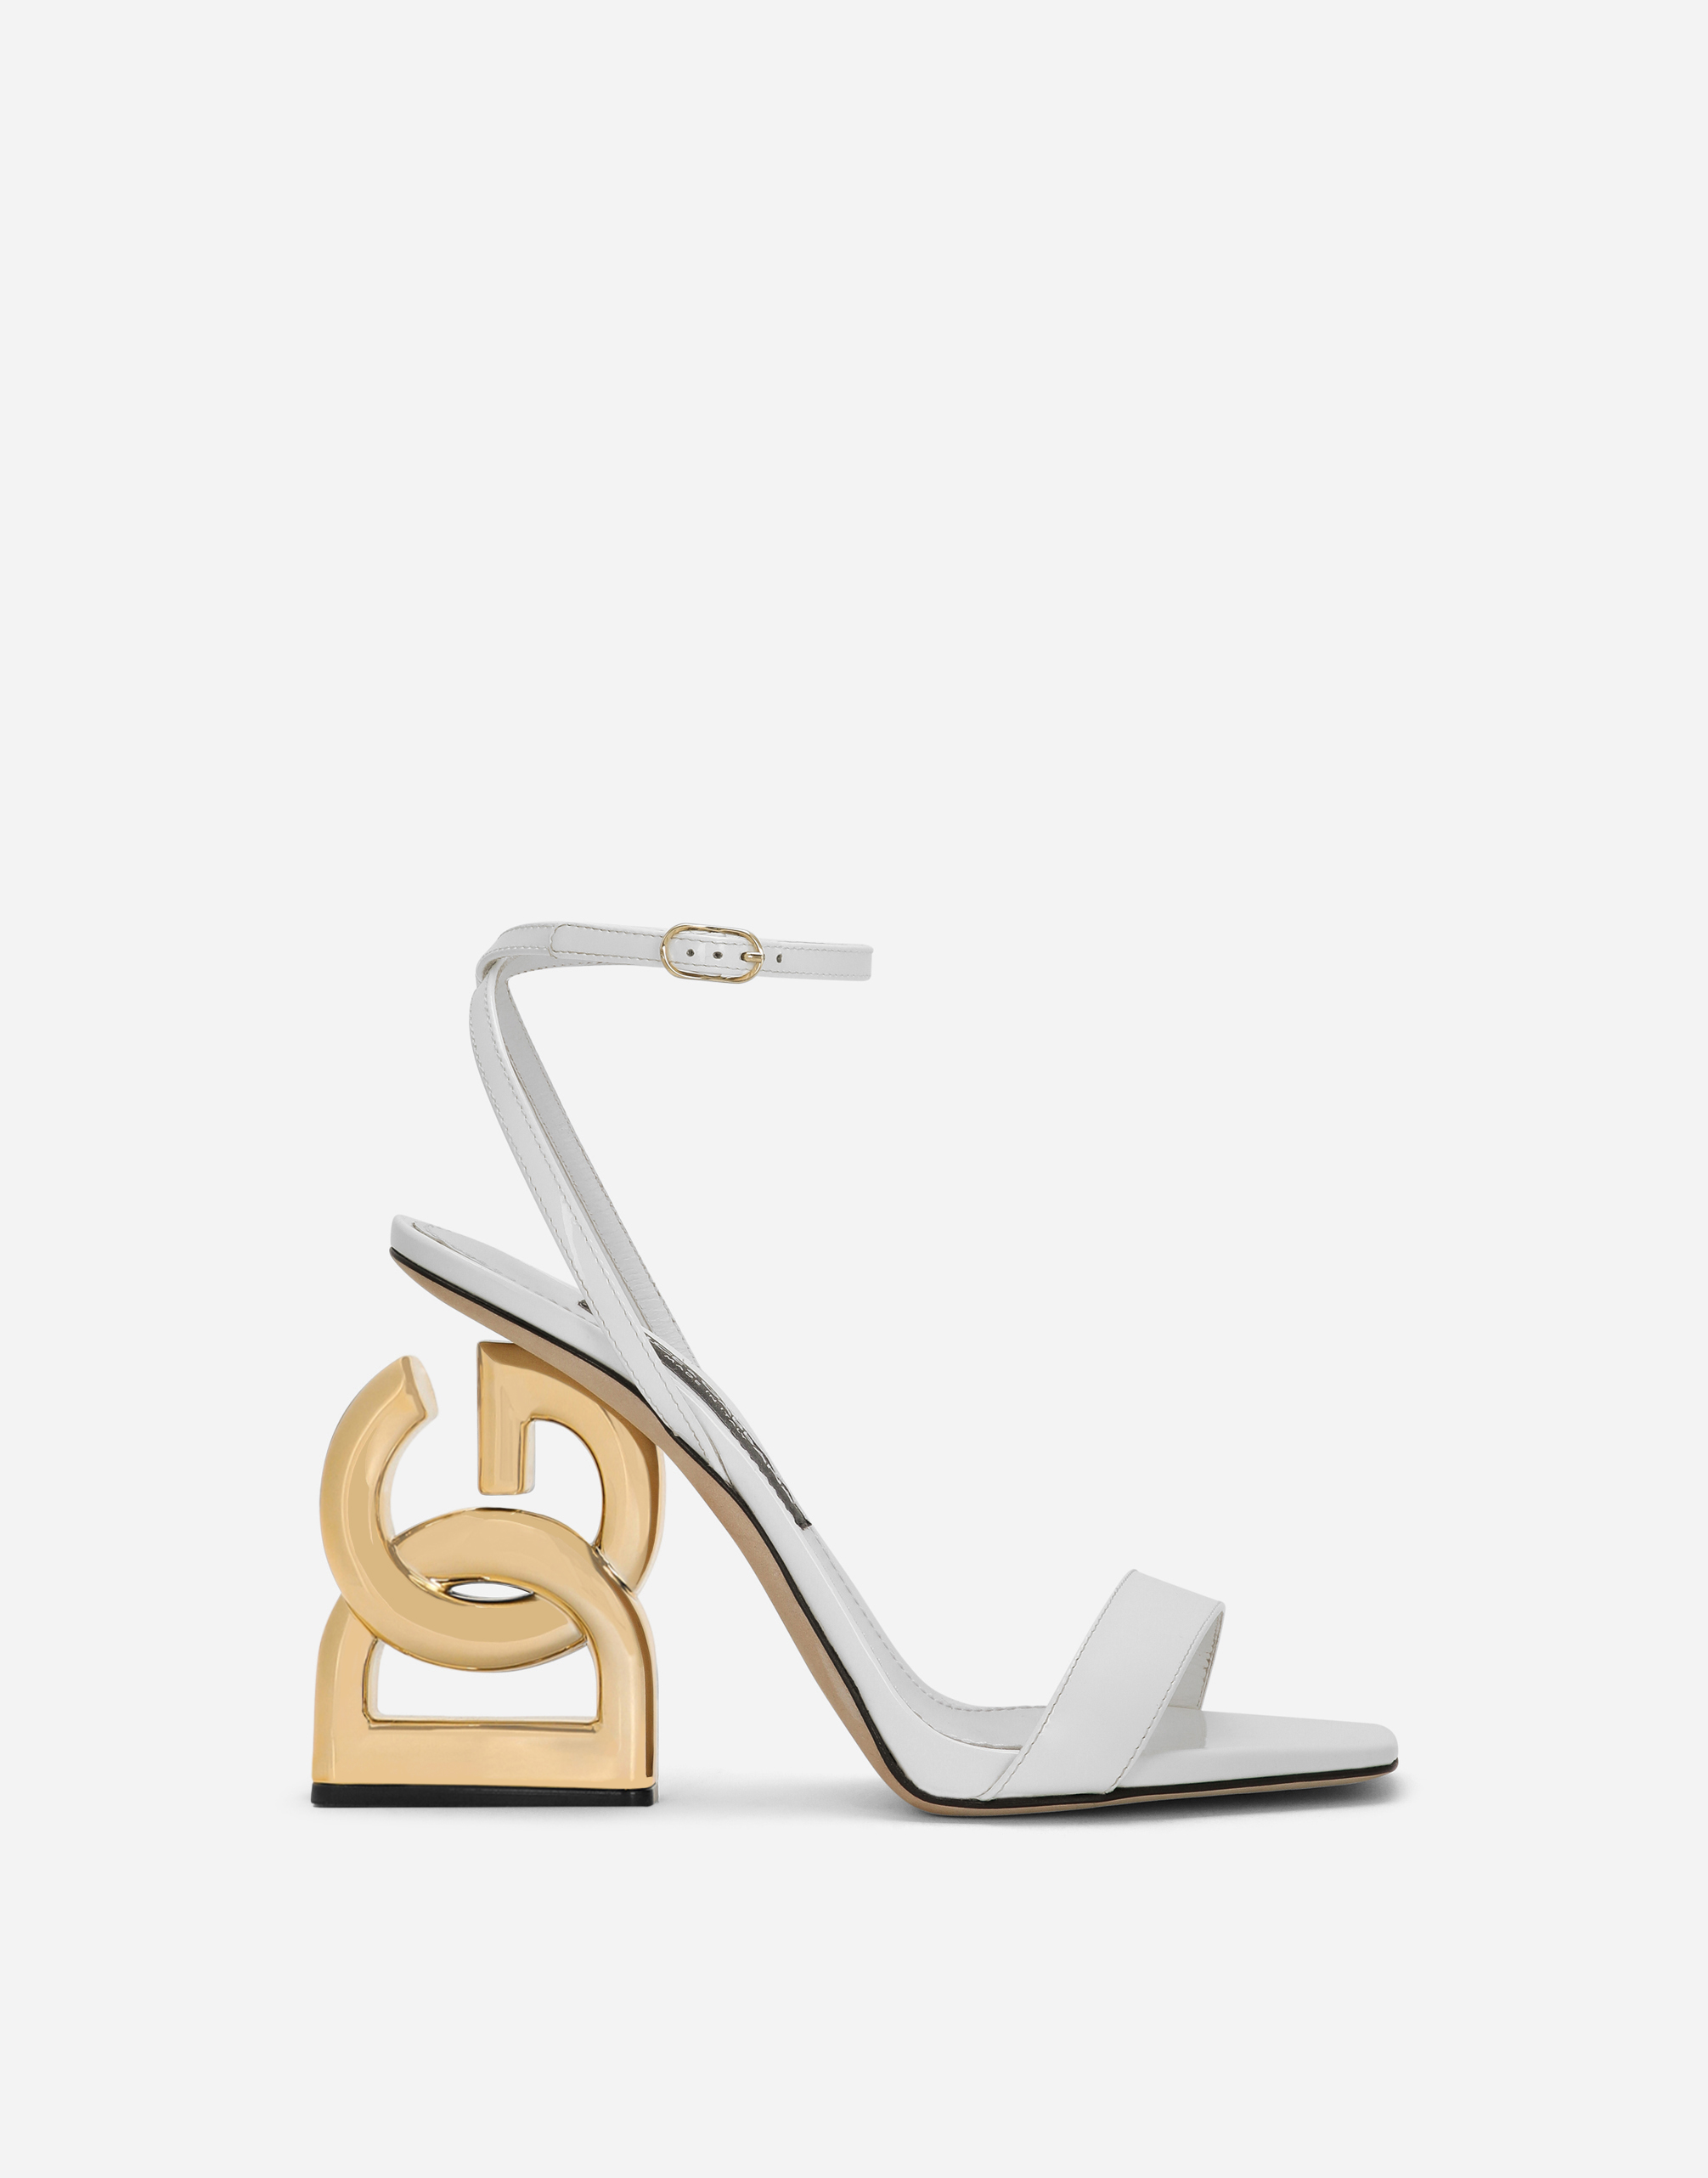 Patent leather sandals with 3.5 heel in White